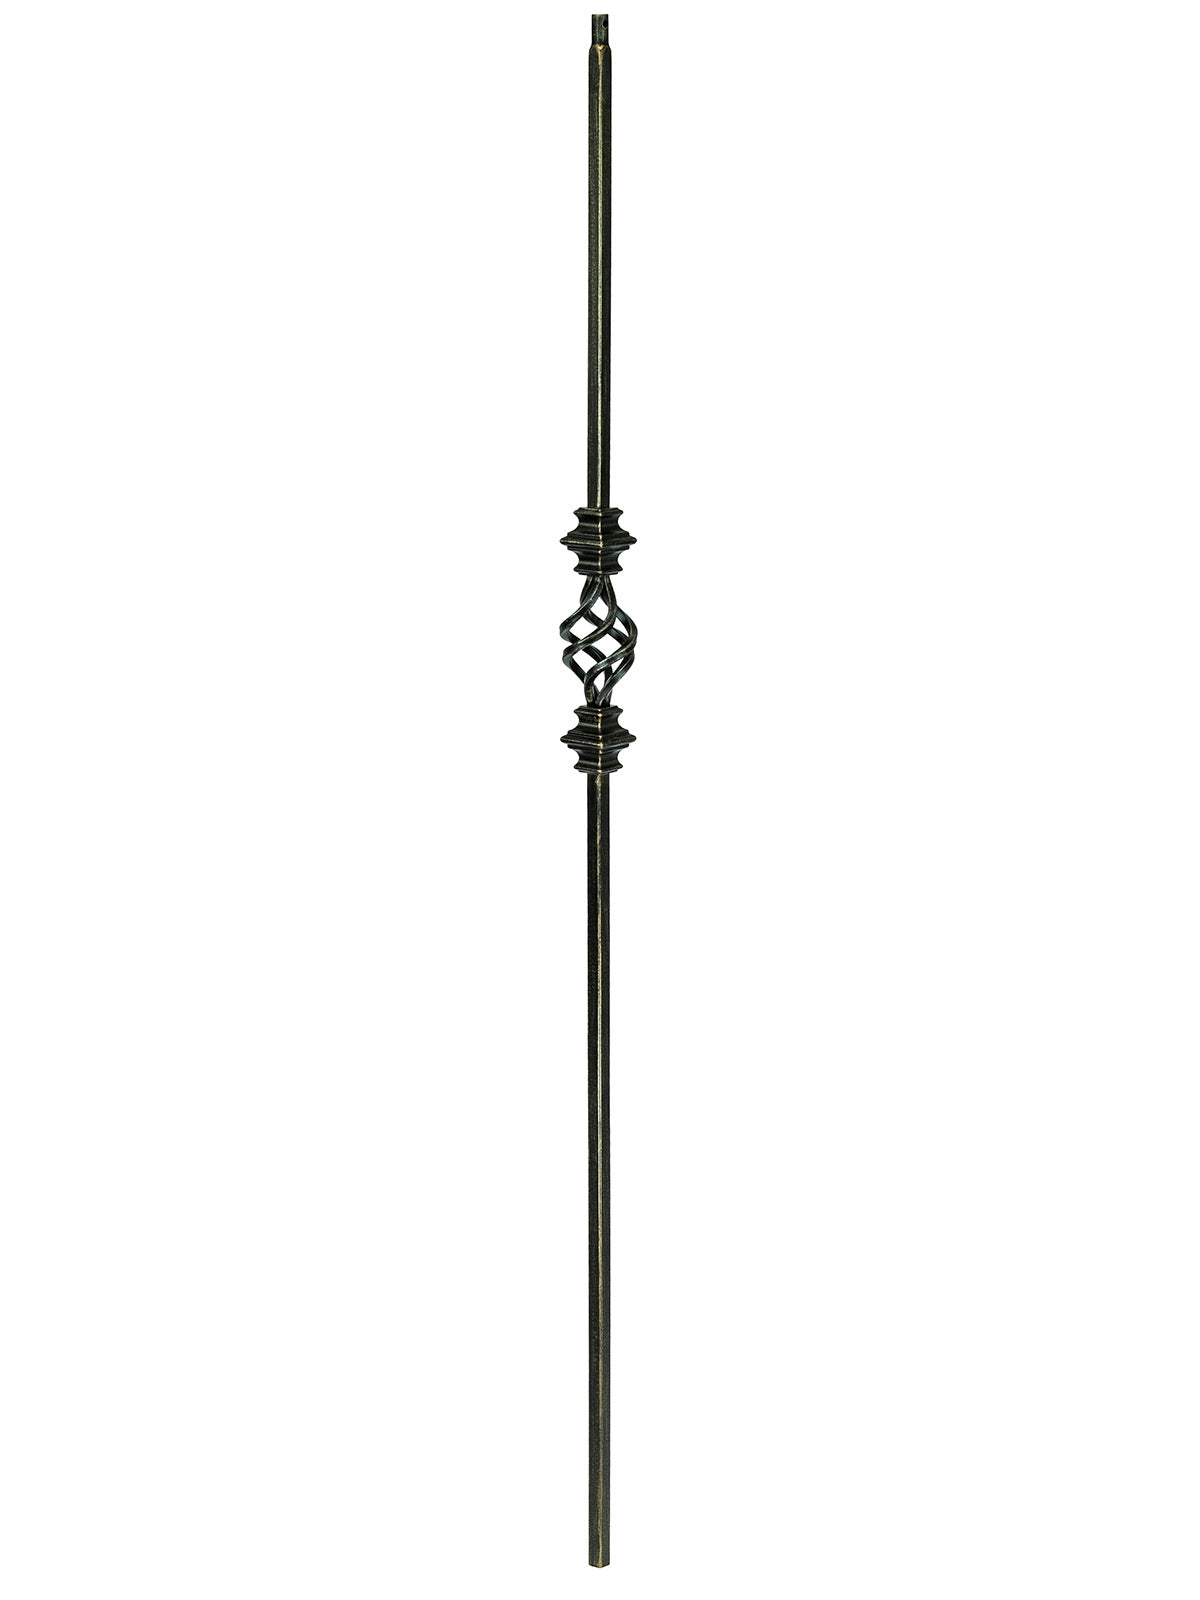 Iron Baluster 9077 - 1/2" Square - Single Basket w/ Knuckles